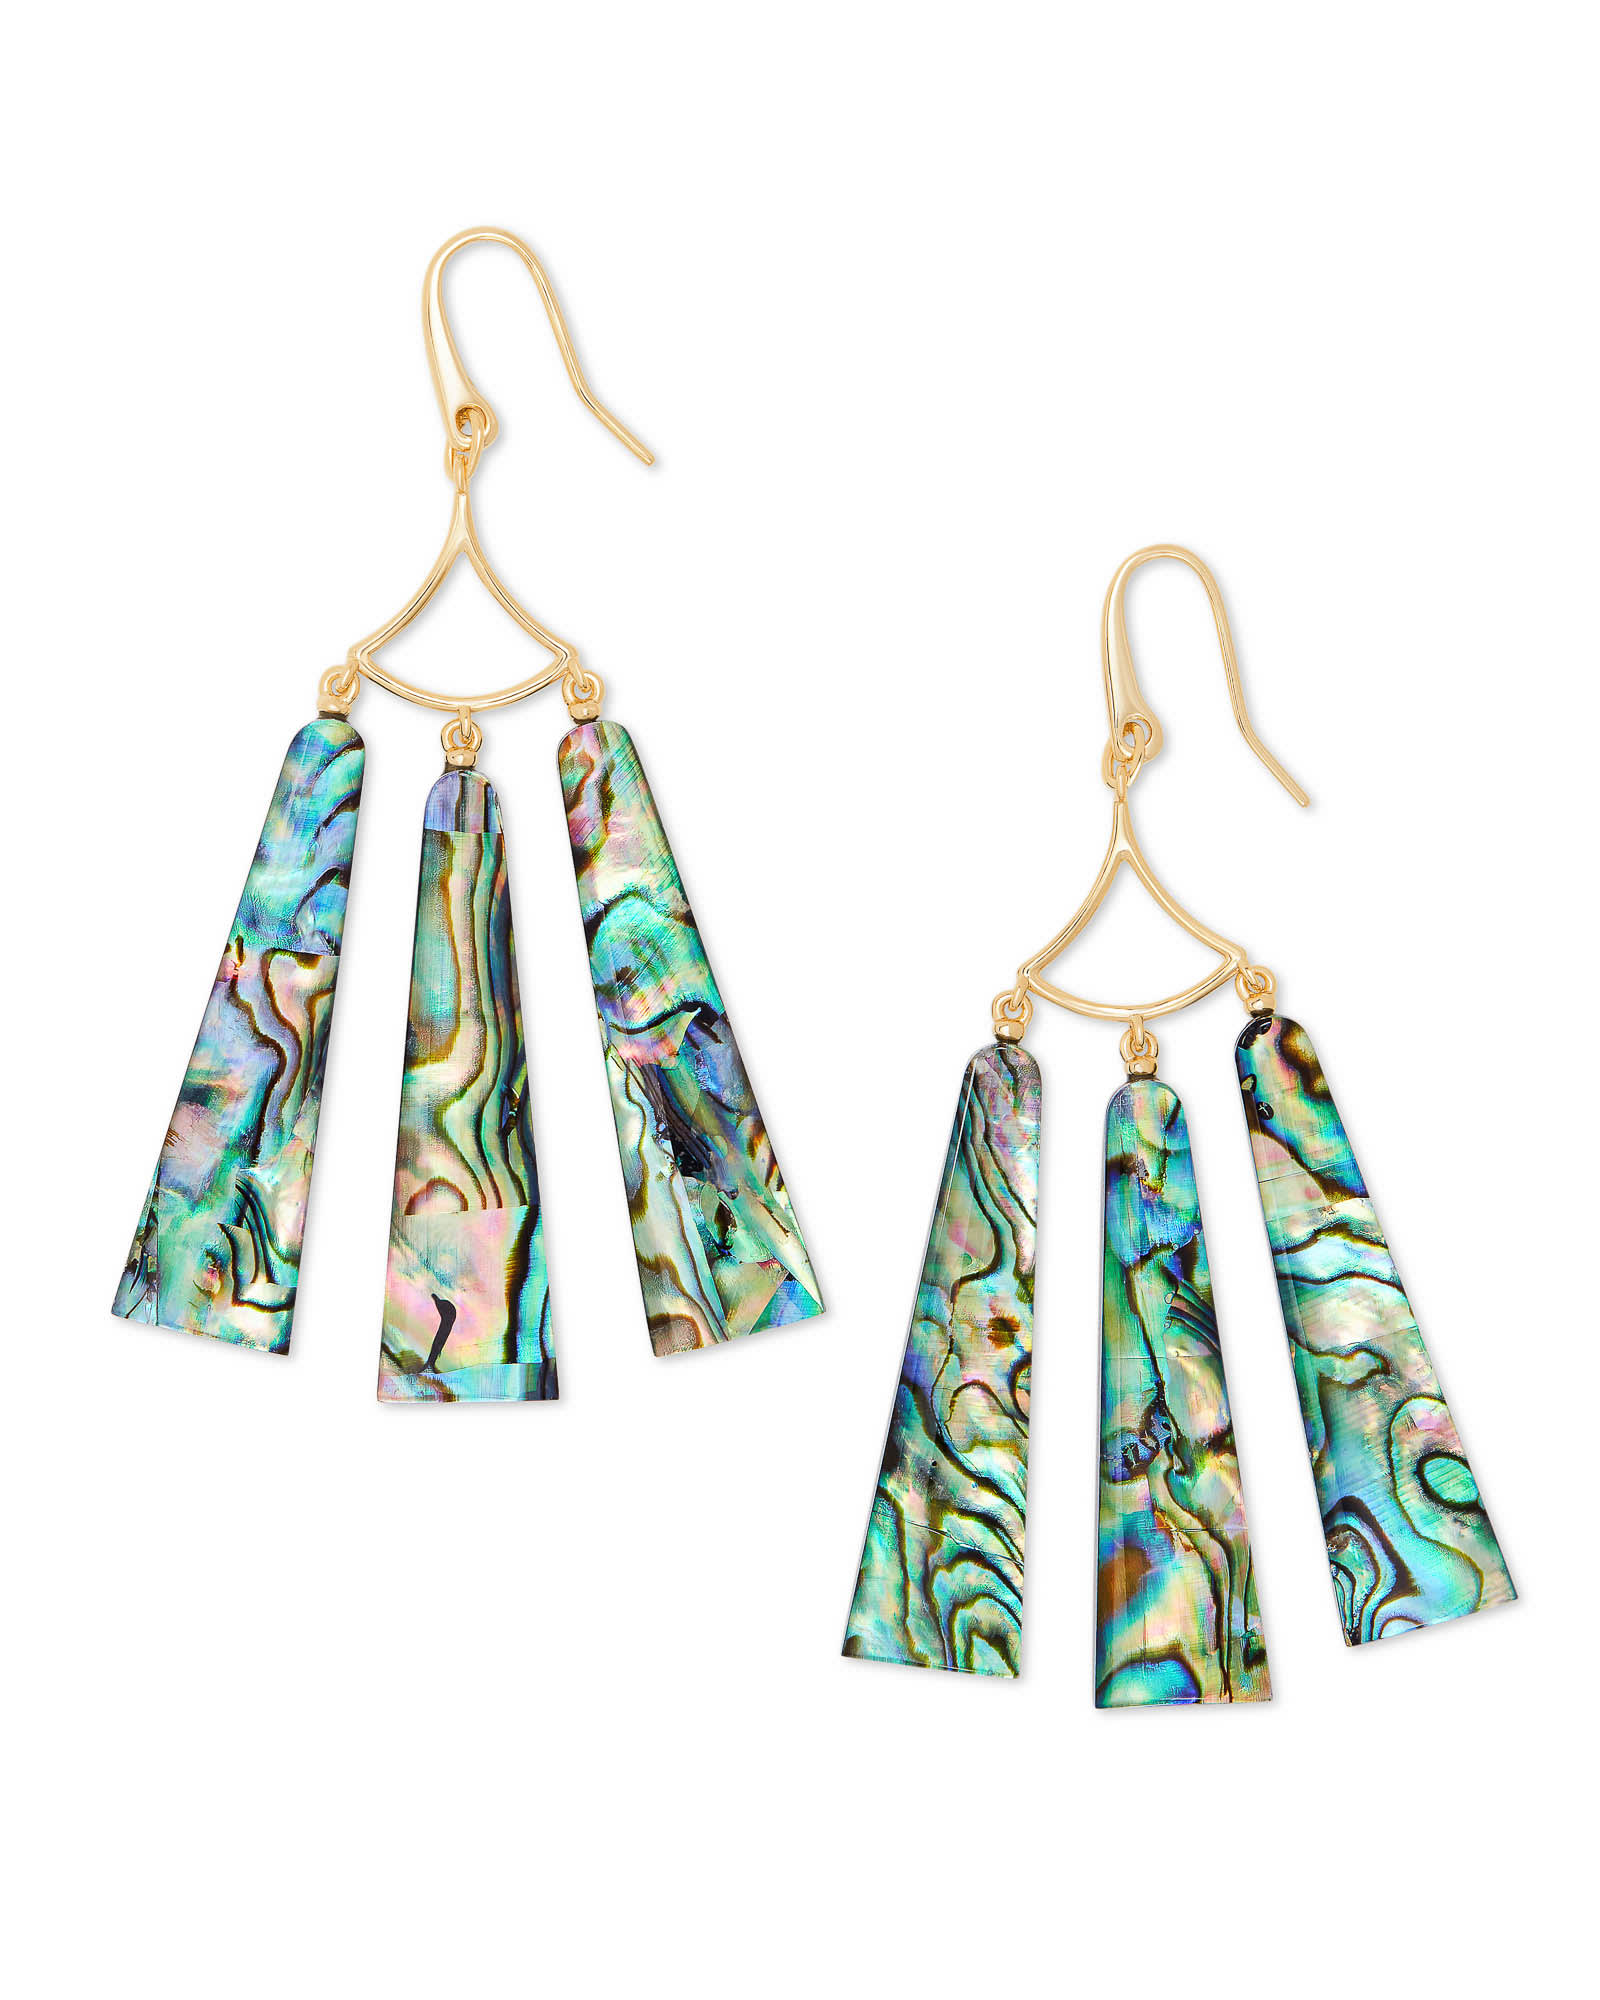 Layton Gold Statement Earrings in Abalone Shell